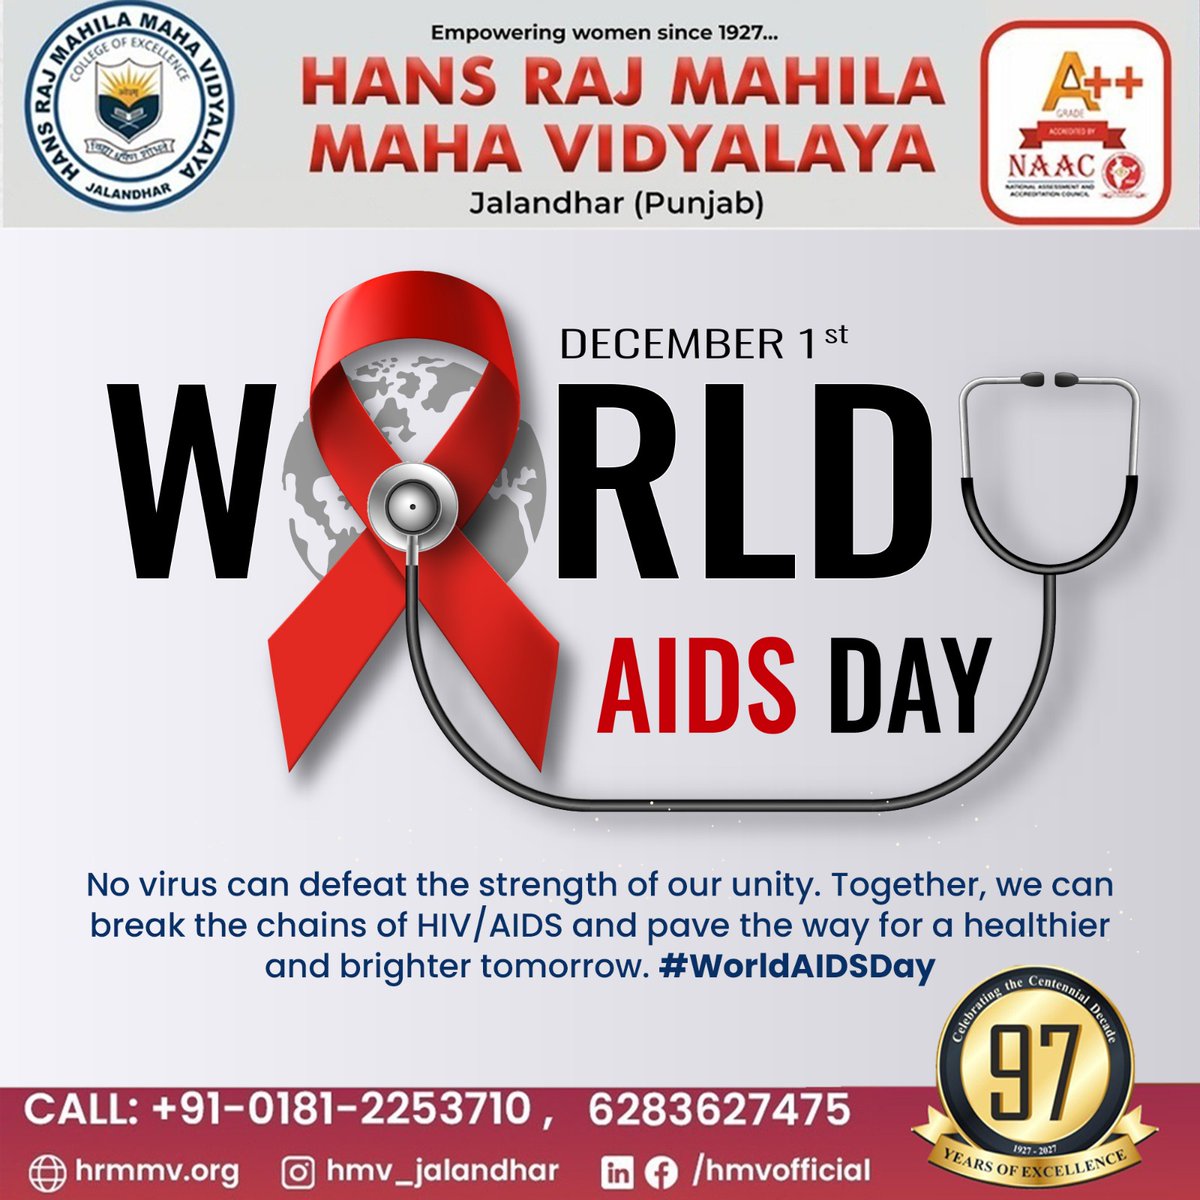 AIDS is not over, but it can be.

Raise awareness, and end the epidemic on World AIDS Day. Together, we are stronger. ❤️🌍

.

.

.

#worldaidsday #aids #aidsawareness #lifewithaids #aidsday #worldaidsday2023 #aidsprevention #aidssupport #hiv #hmv #hmvjalandhar